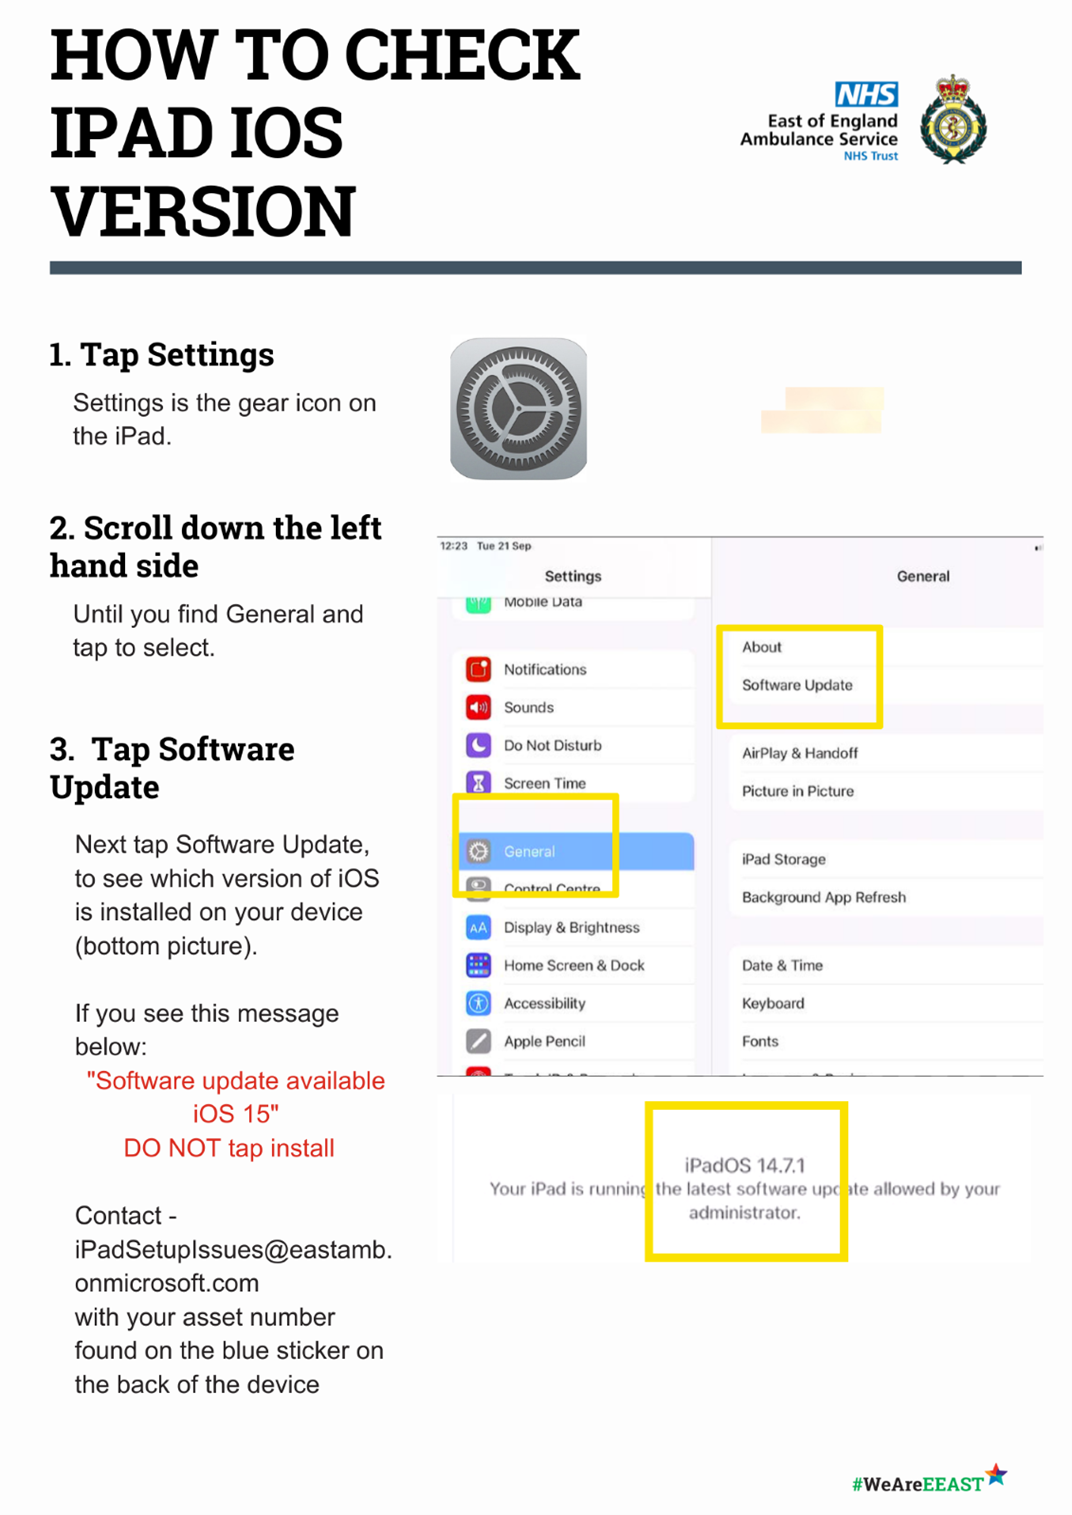 How to check iPad IOS version